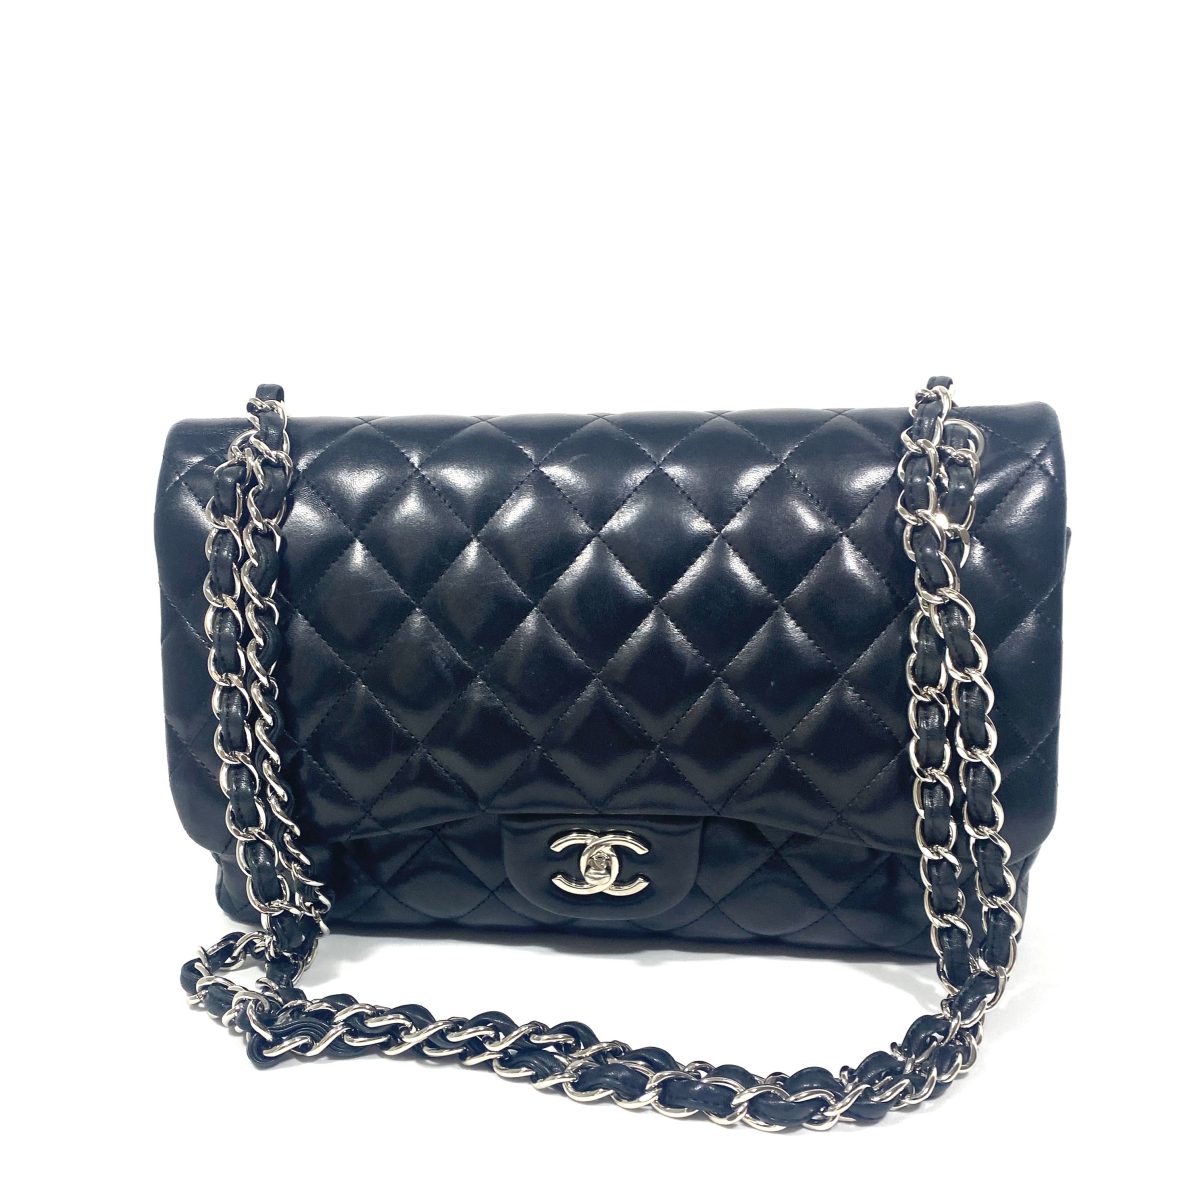 Chanel preloved bags